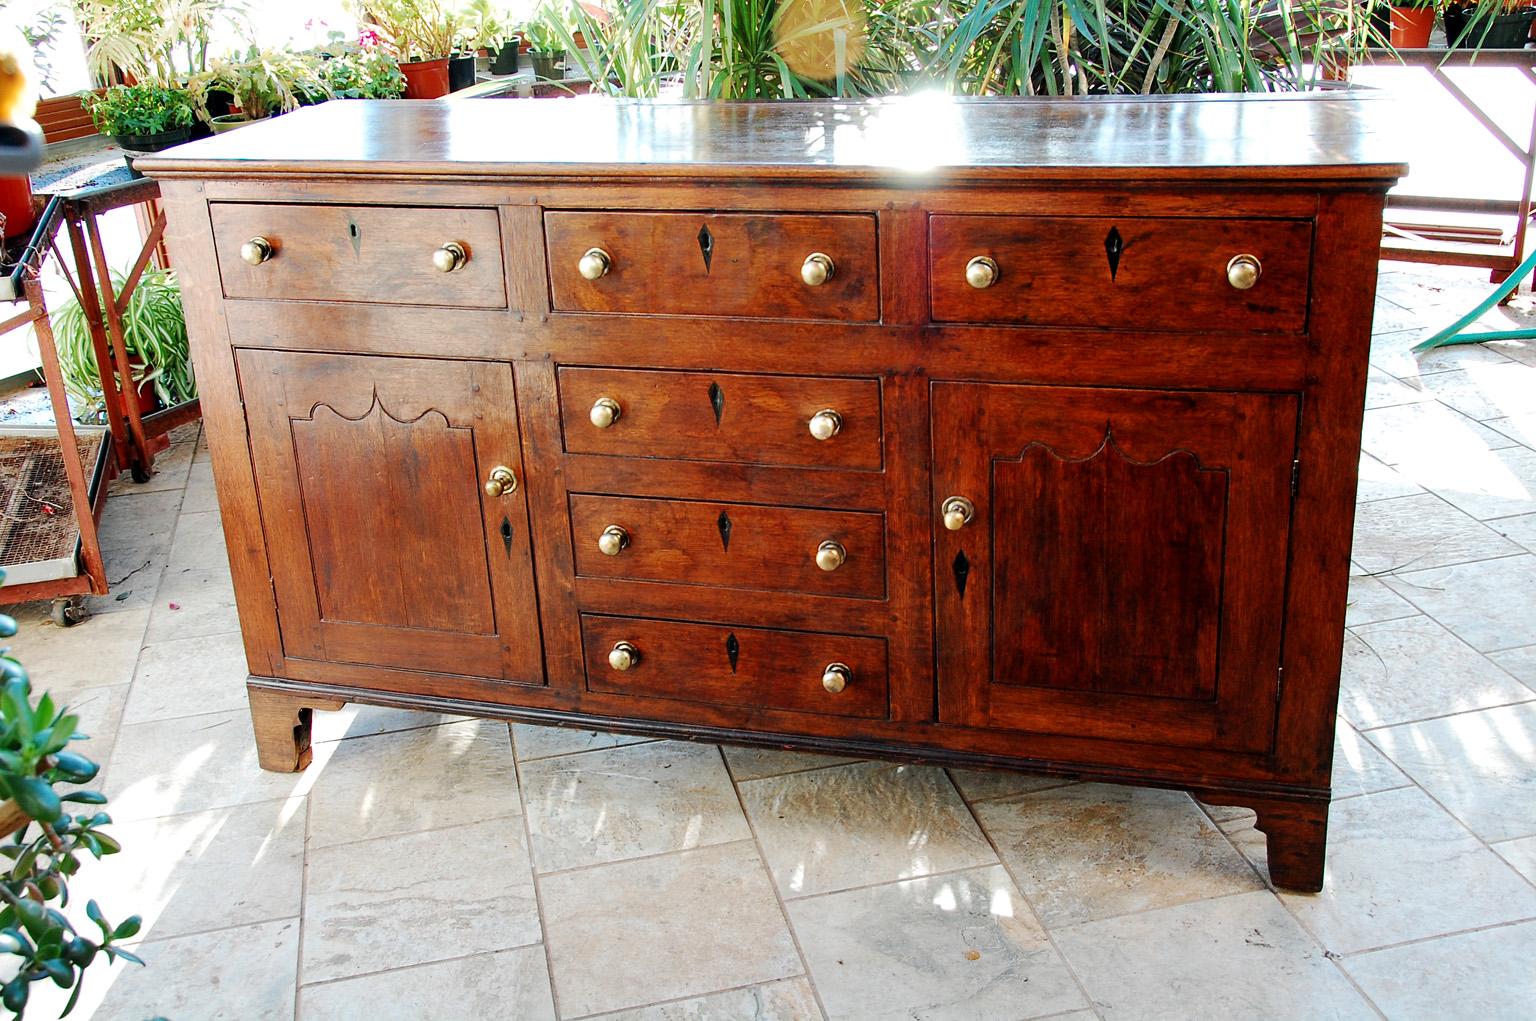 Welsh Georgian oak low dresser with two cupboards and four working drawers, two sham drawers. This early 19th century dresser has shaped paneled doors to the cupboards, blackened walnut diamond shaped escutcheons around the key holes and replaced